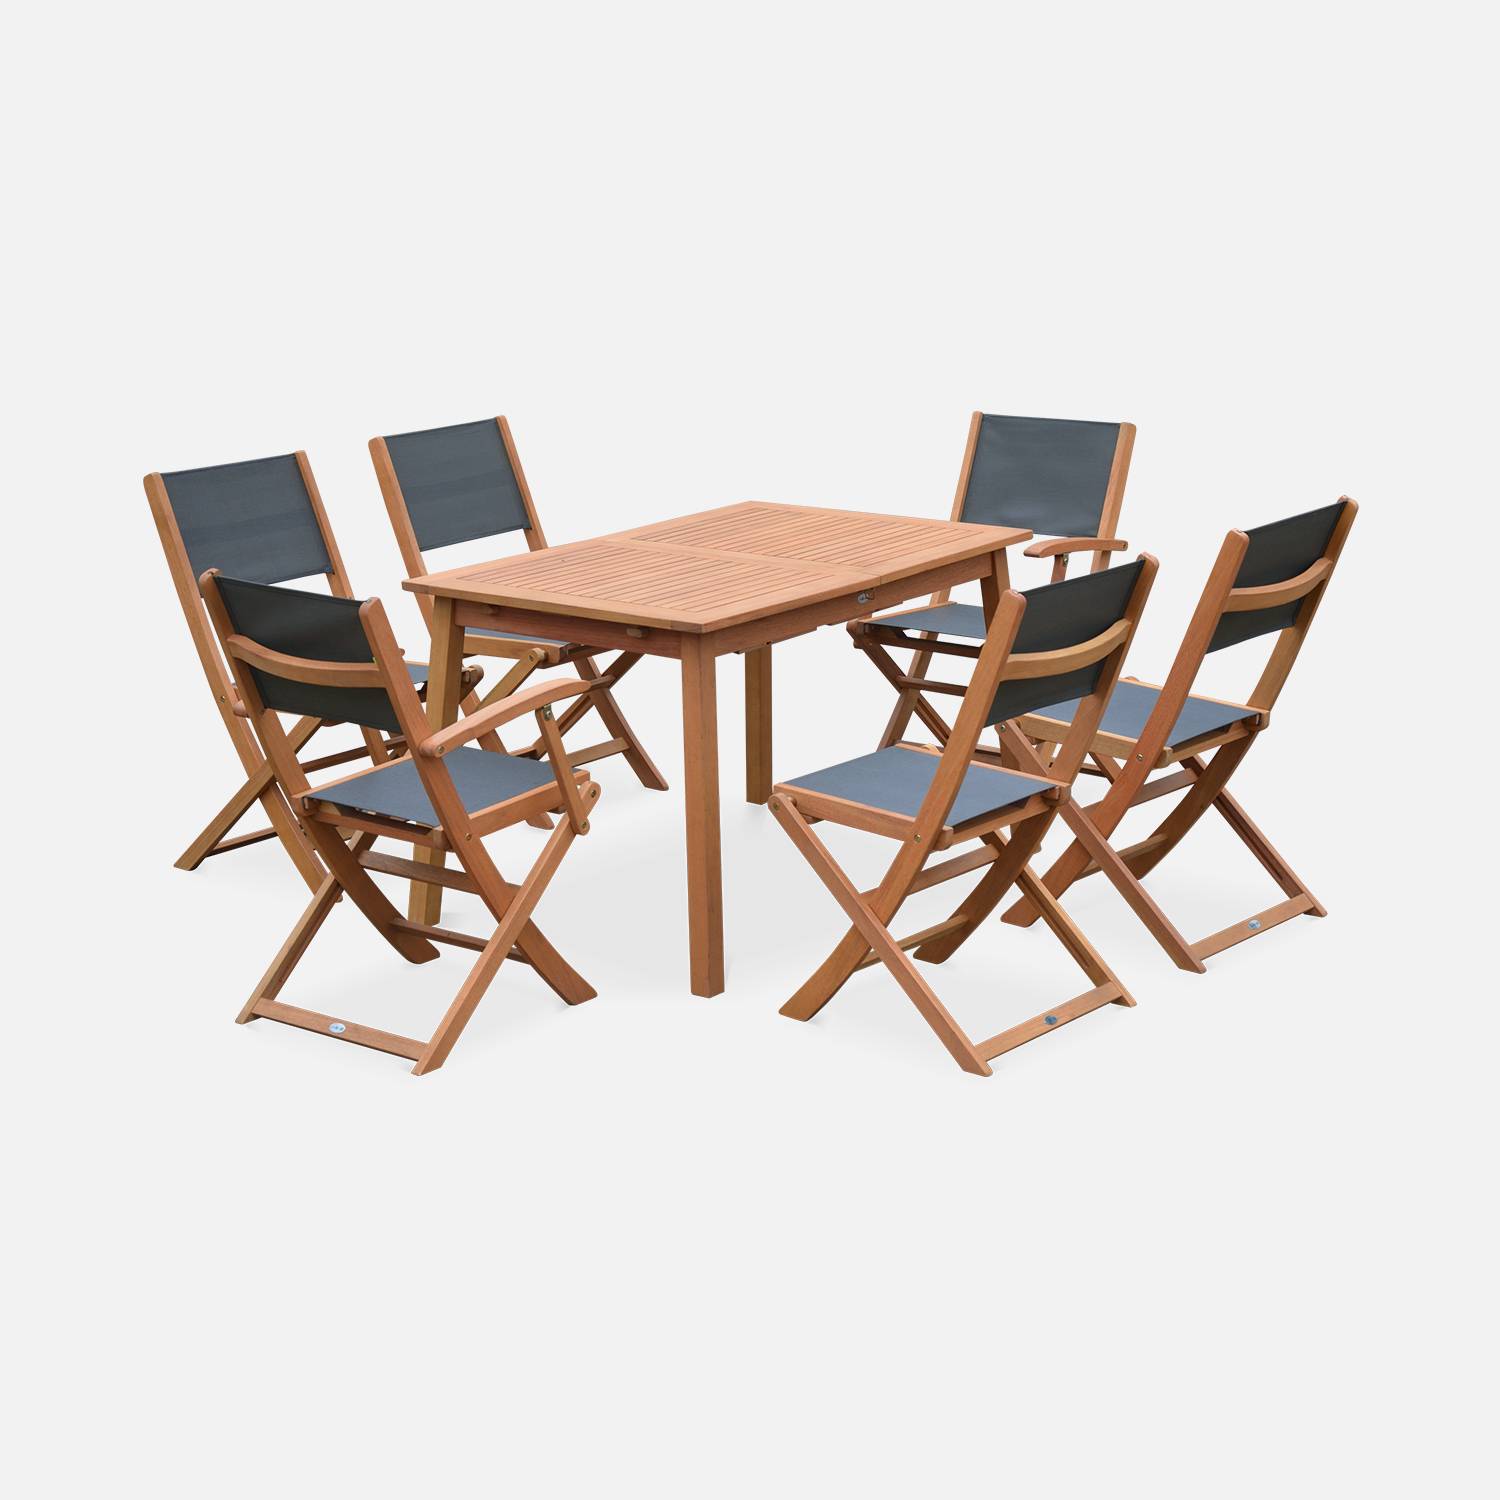 6-seater garden dining set, extendable 120-180cm FSC-eucalyptus wooden table, 4 chairs and 2 armchairs - Almeria 6 - Anthracite textilene seats Photo4